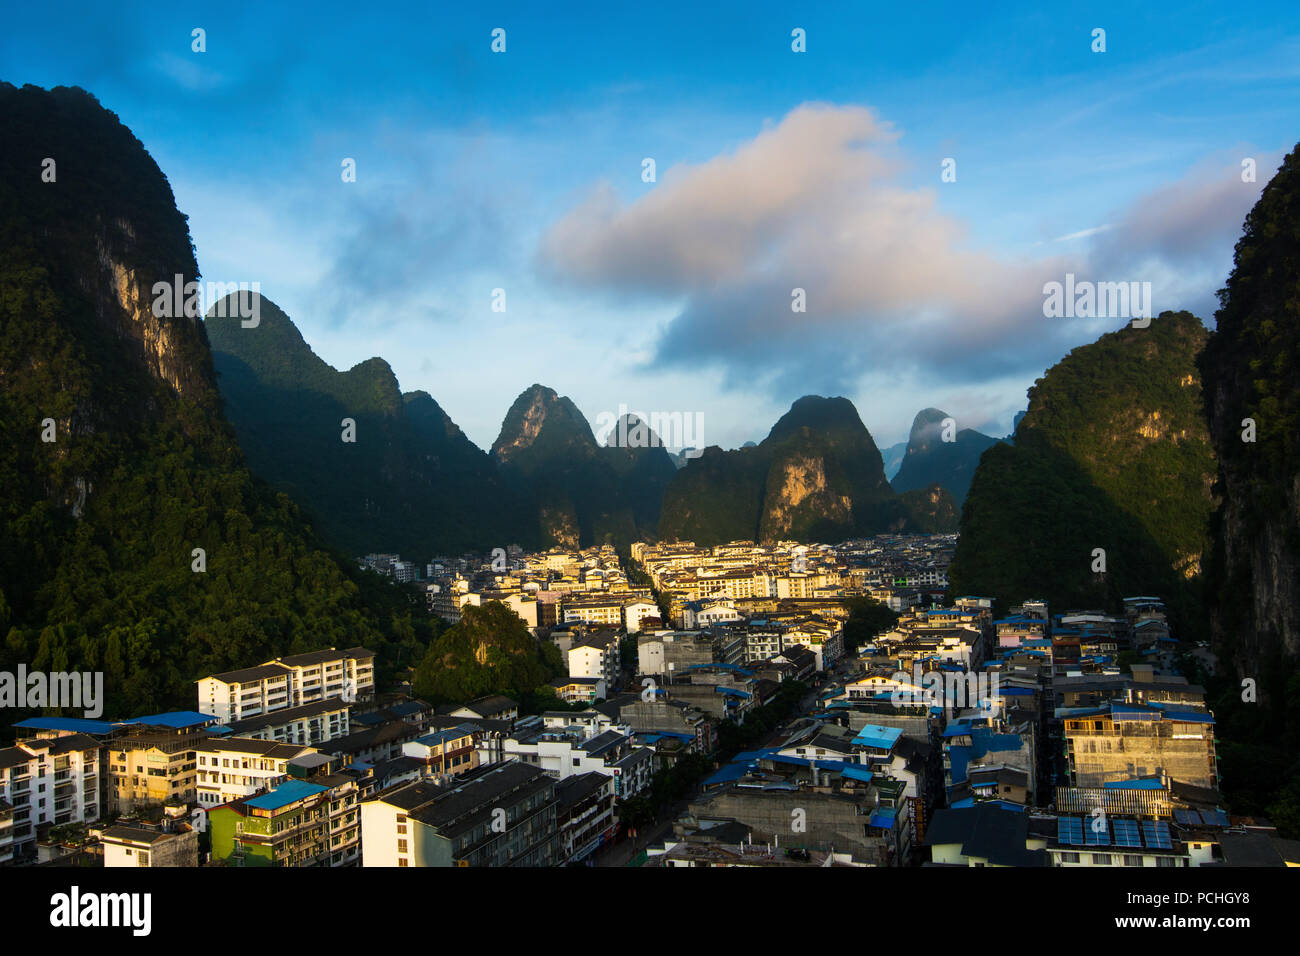 Cityscape of Yangshuo in China with famous karst formations Stock Photo